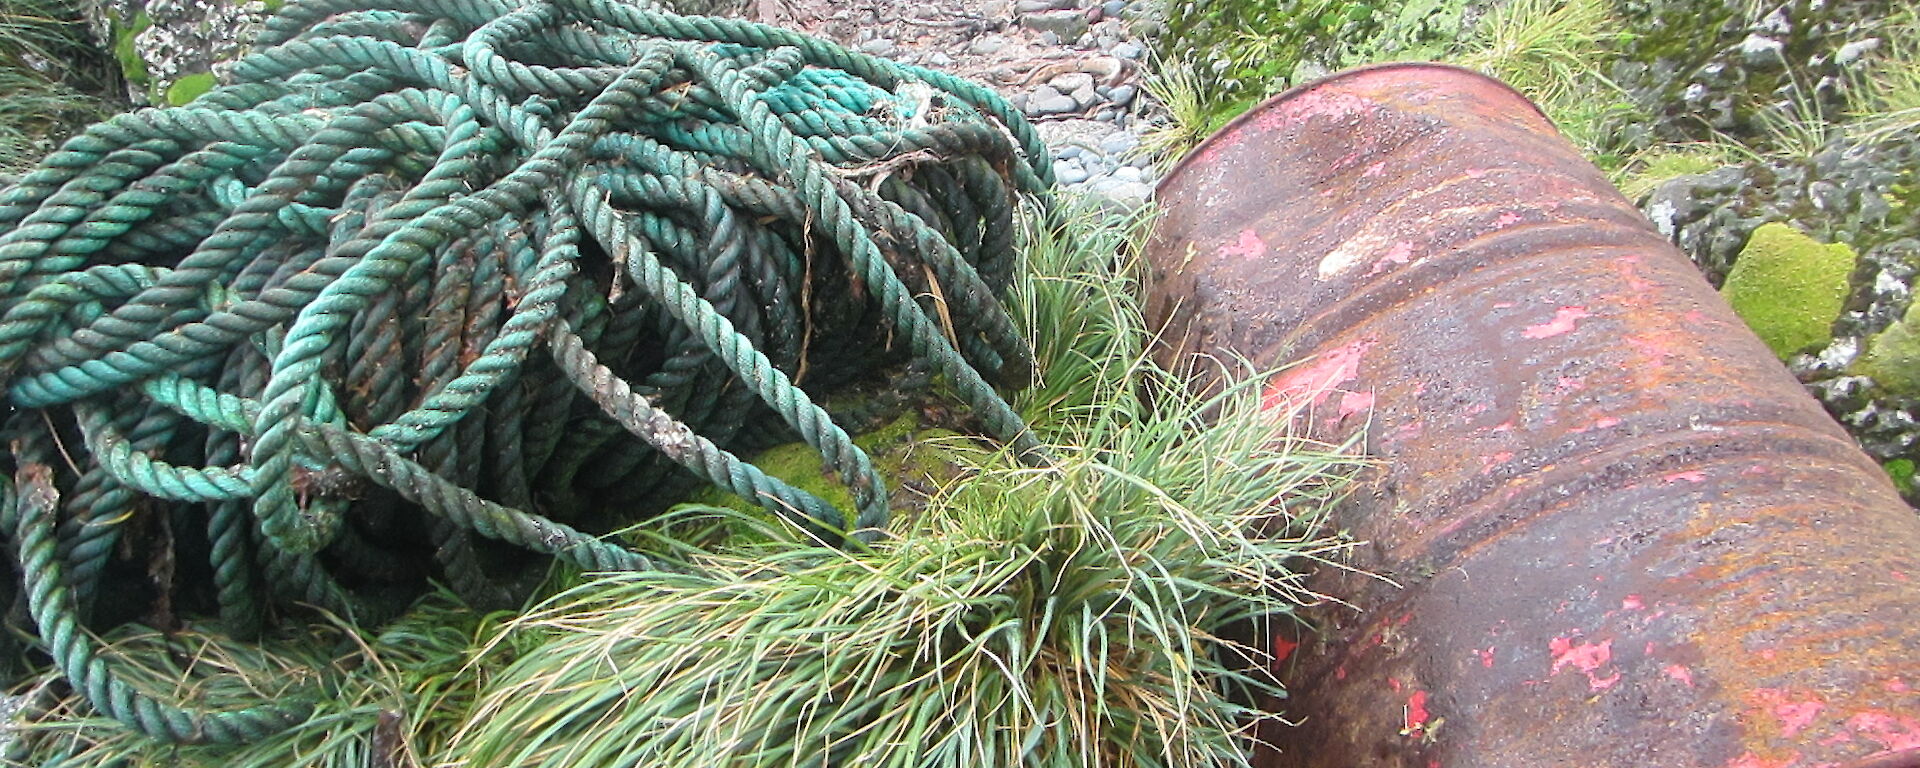 long, rolled up rope and rusty oil drum on the shore